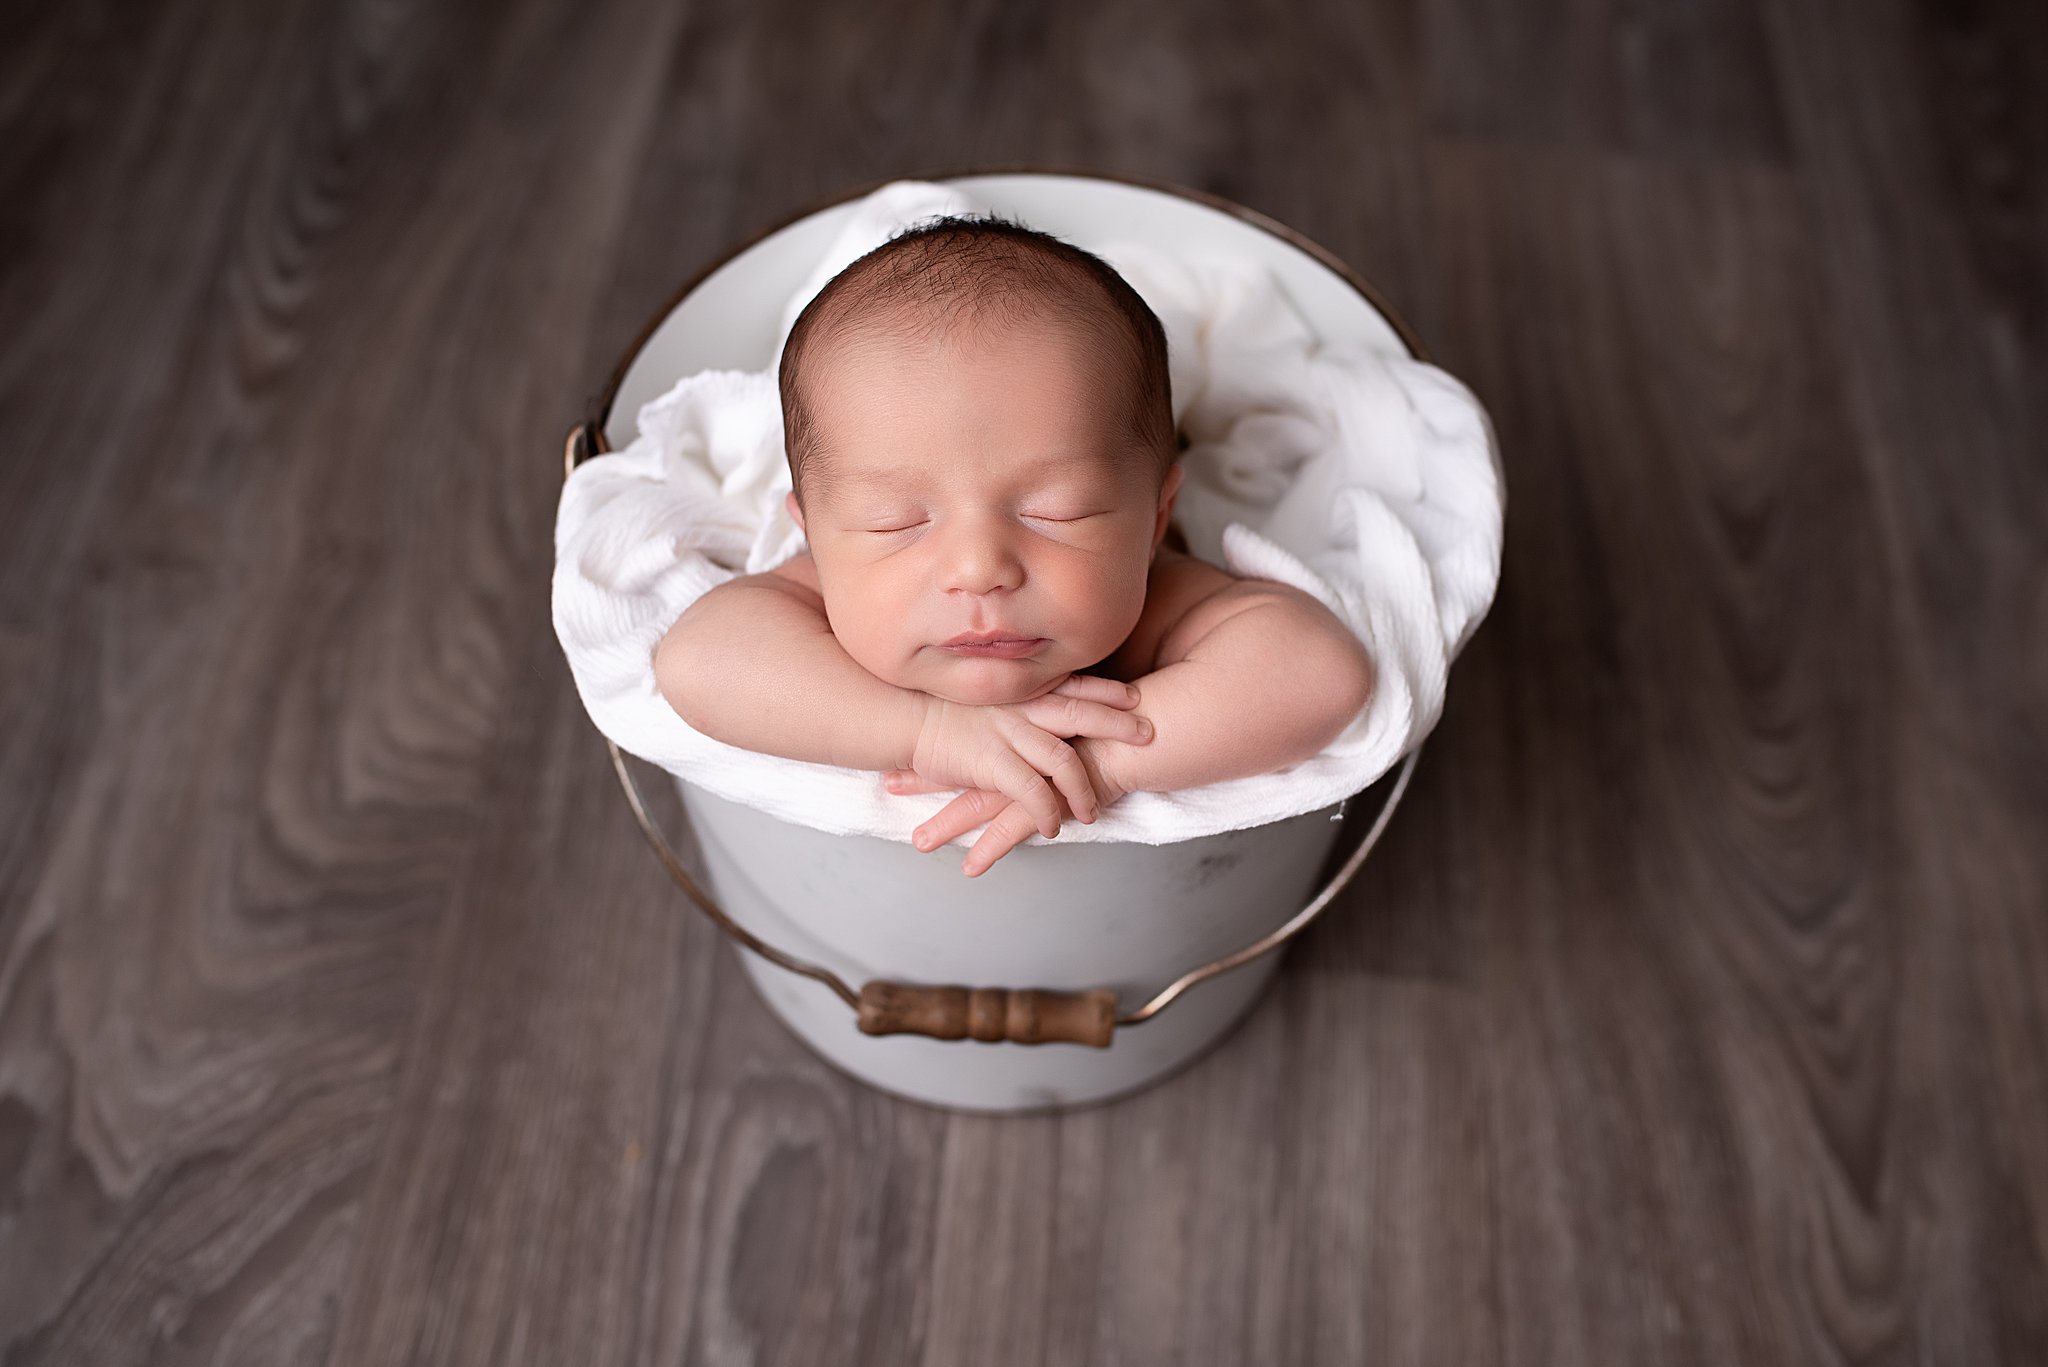 A newborn baby sleeps inside a metal bucket while resting its heads on its hands on the edge of the bucket baby's away san diego